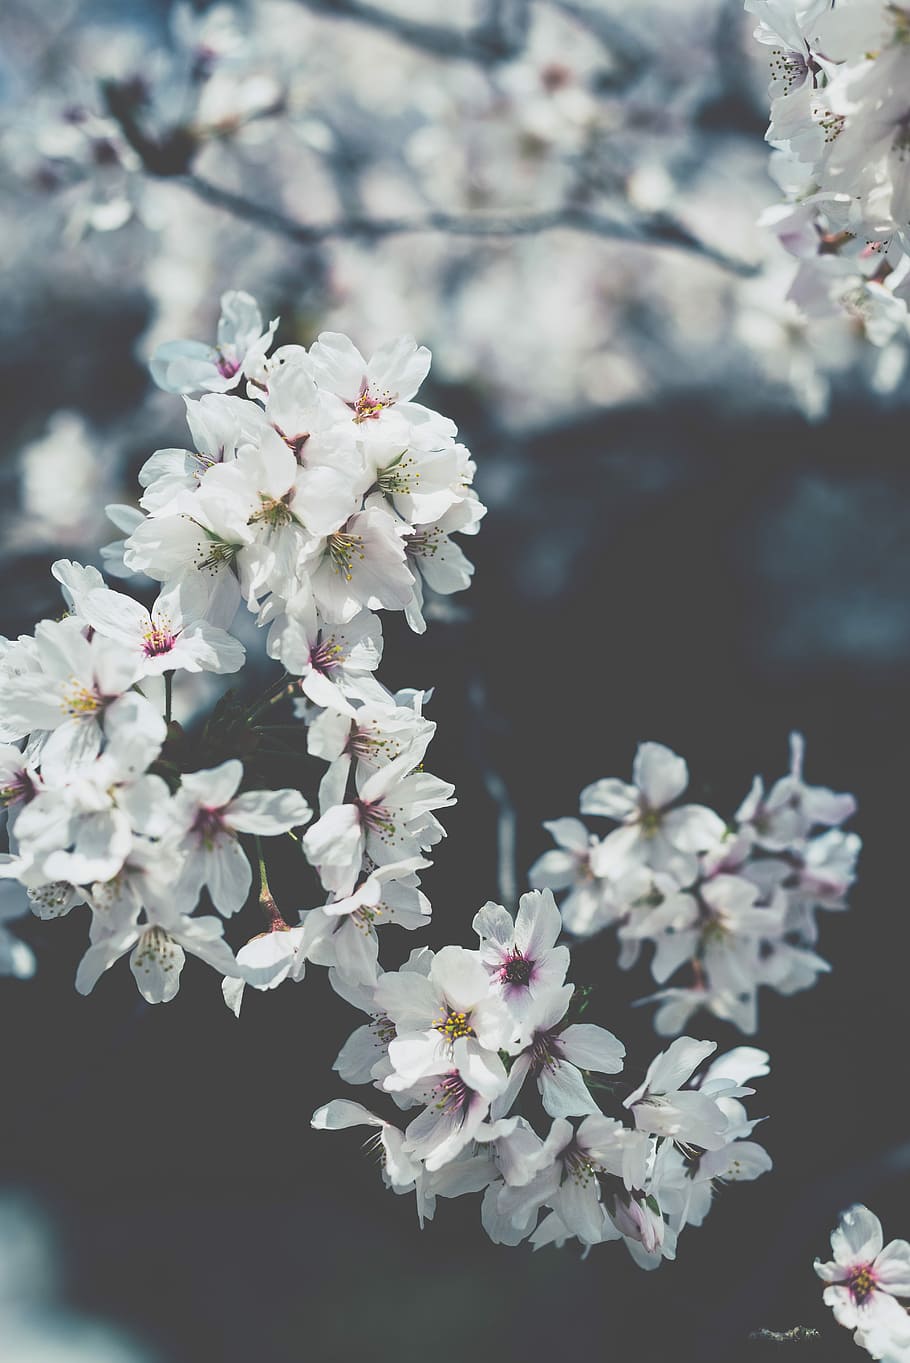 HD wallpaper: white flowering plant, close up photo of white cherry blossoms in bloom